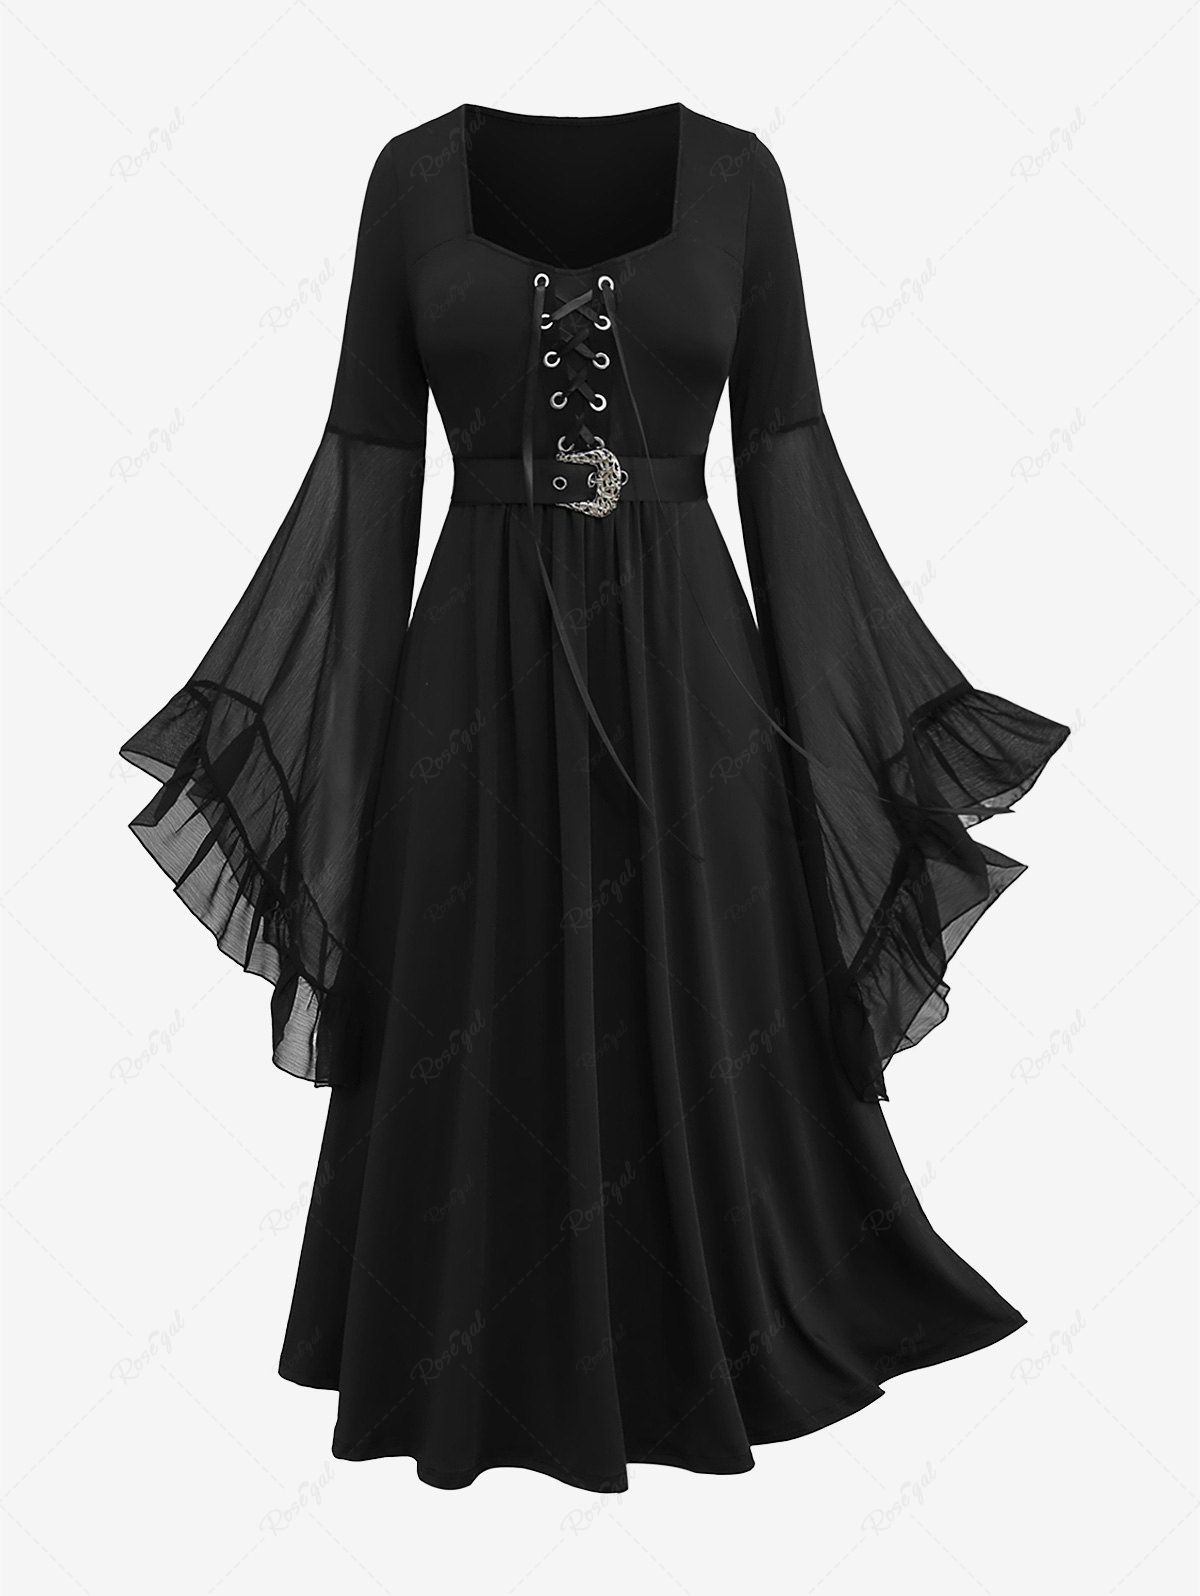 Hot Plus Size Grommets Lace Up Mesh Bell Sleeves Buckle Belt Dress  